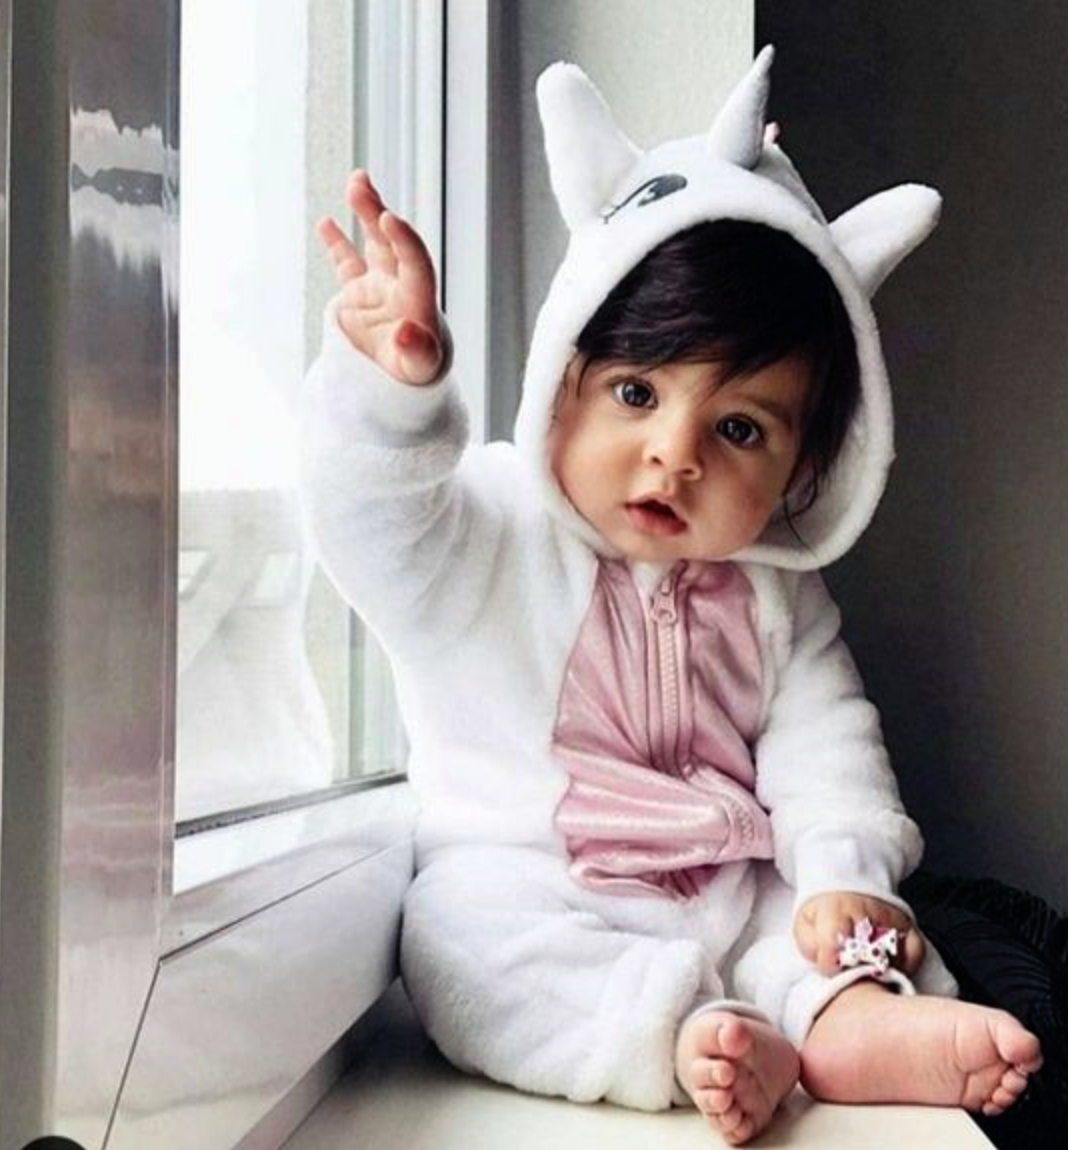 Here are the Top 10 Cutest Babies That Will Melt Your Heart! Cute Warning!